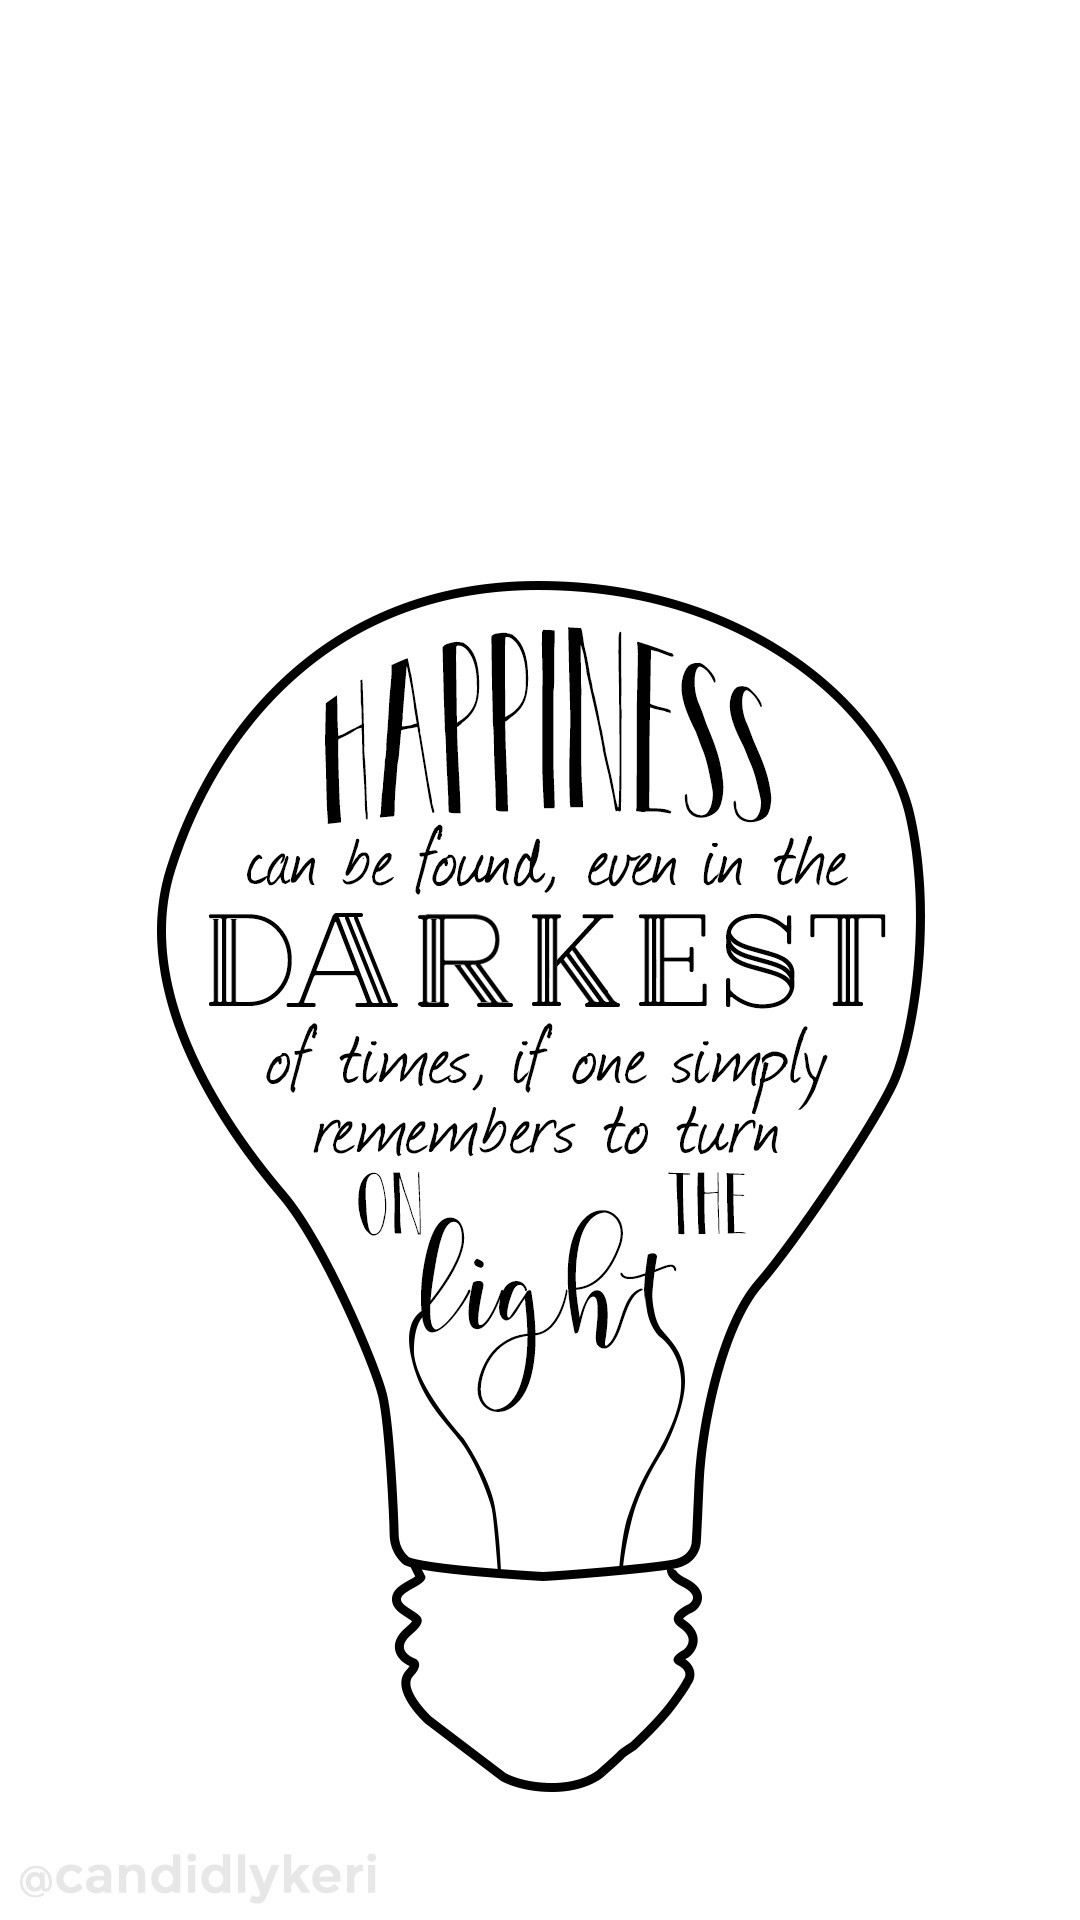 Even in the darkest of time if one simply remembers to turn on the light Dumbledore Harry potter light quote inspirational background wallpaper you can